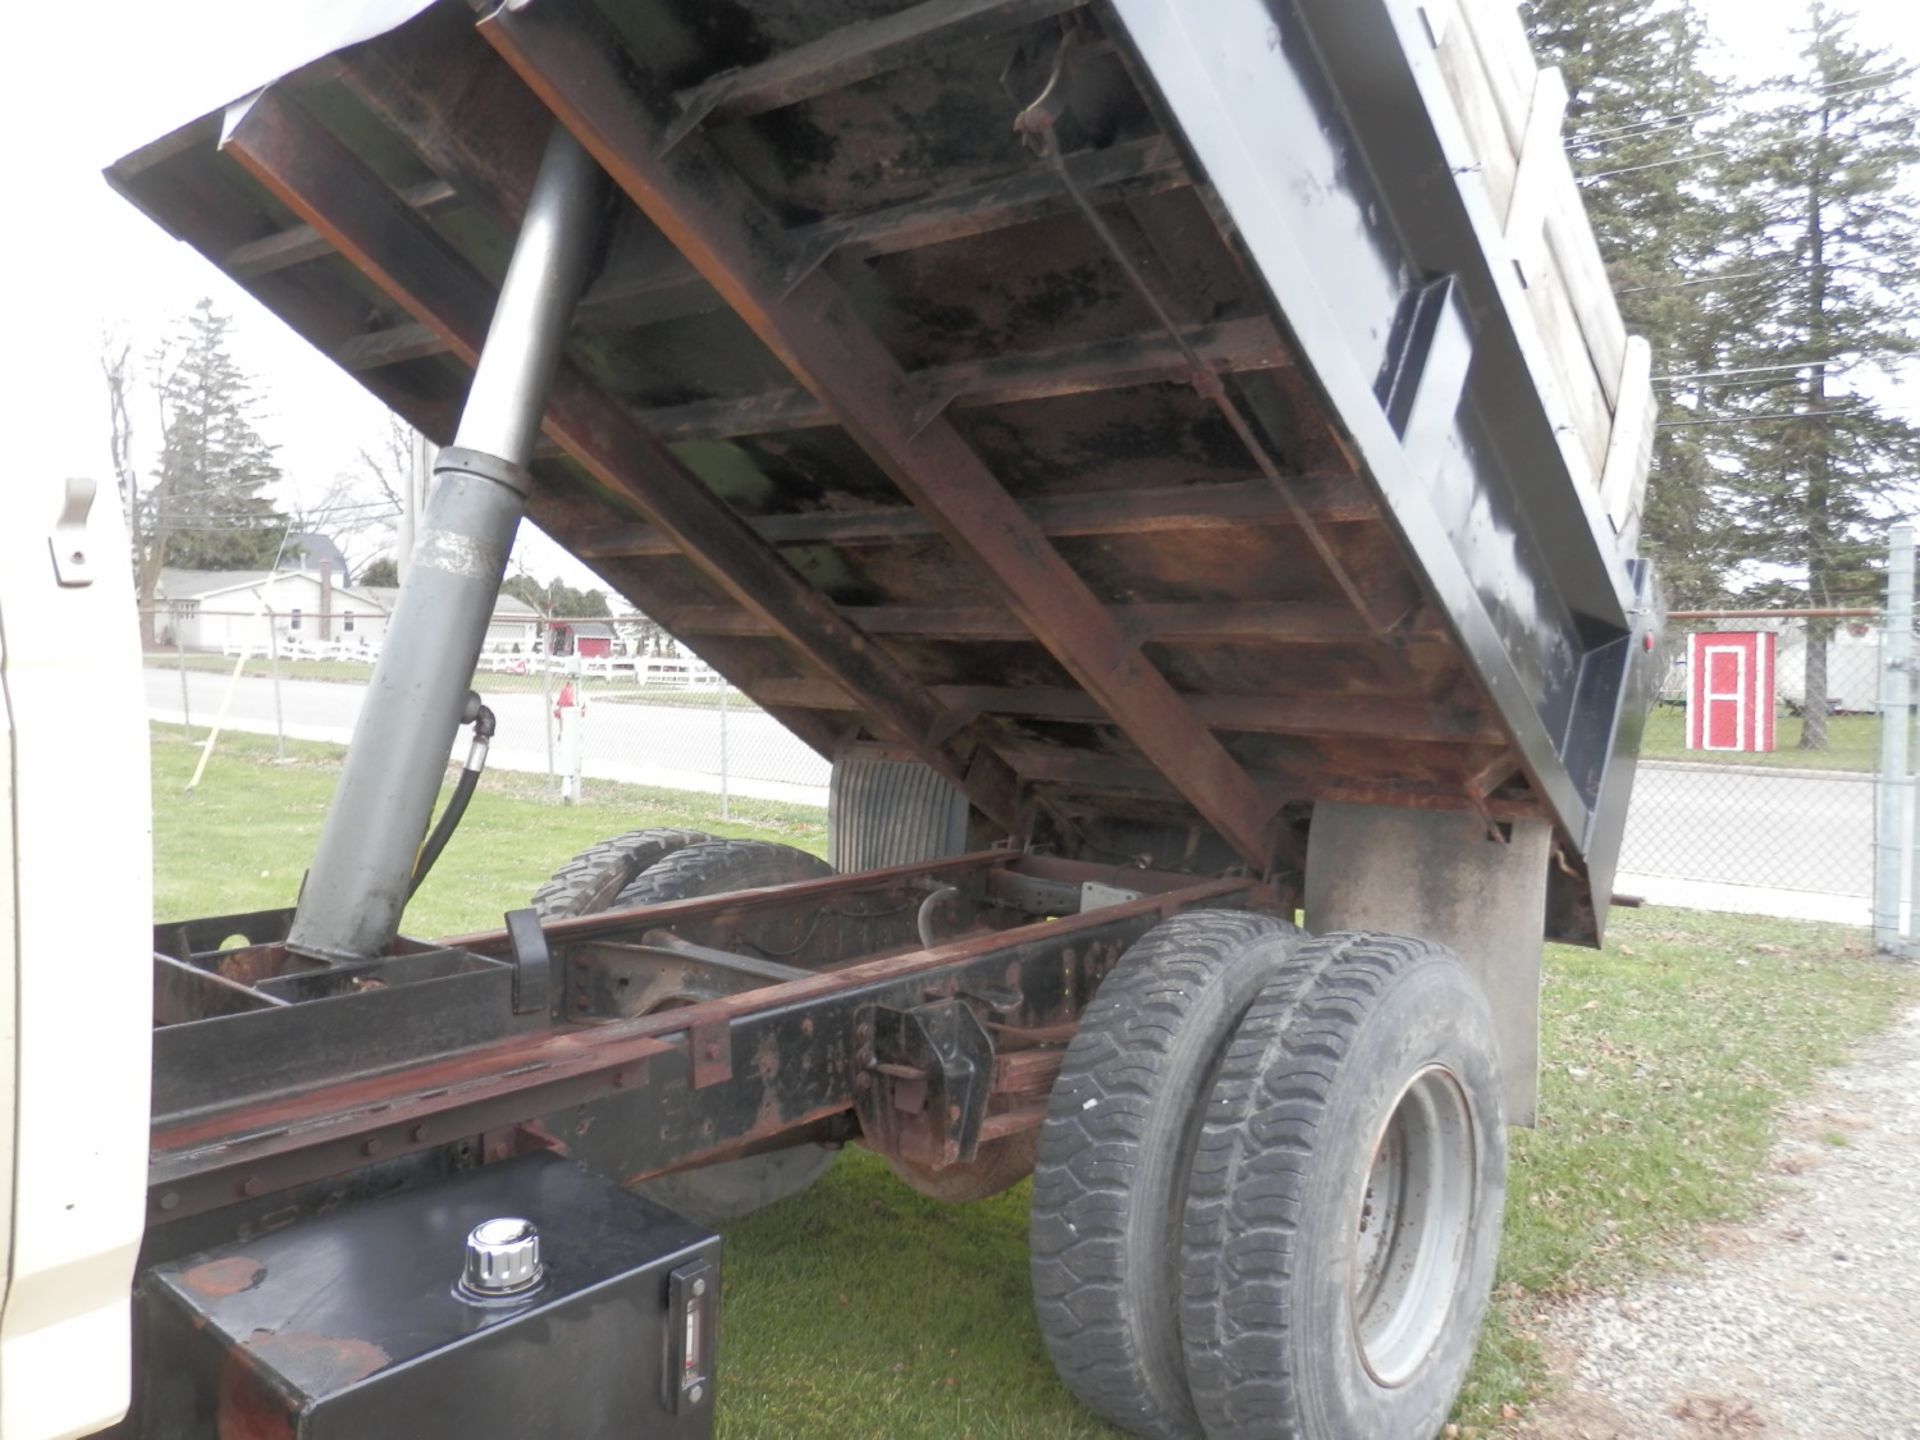 1991 FORD F700 5 YD. DUMP TRUCK - Image 7 of 14